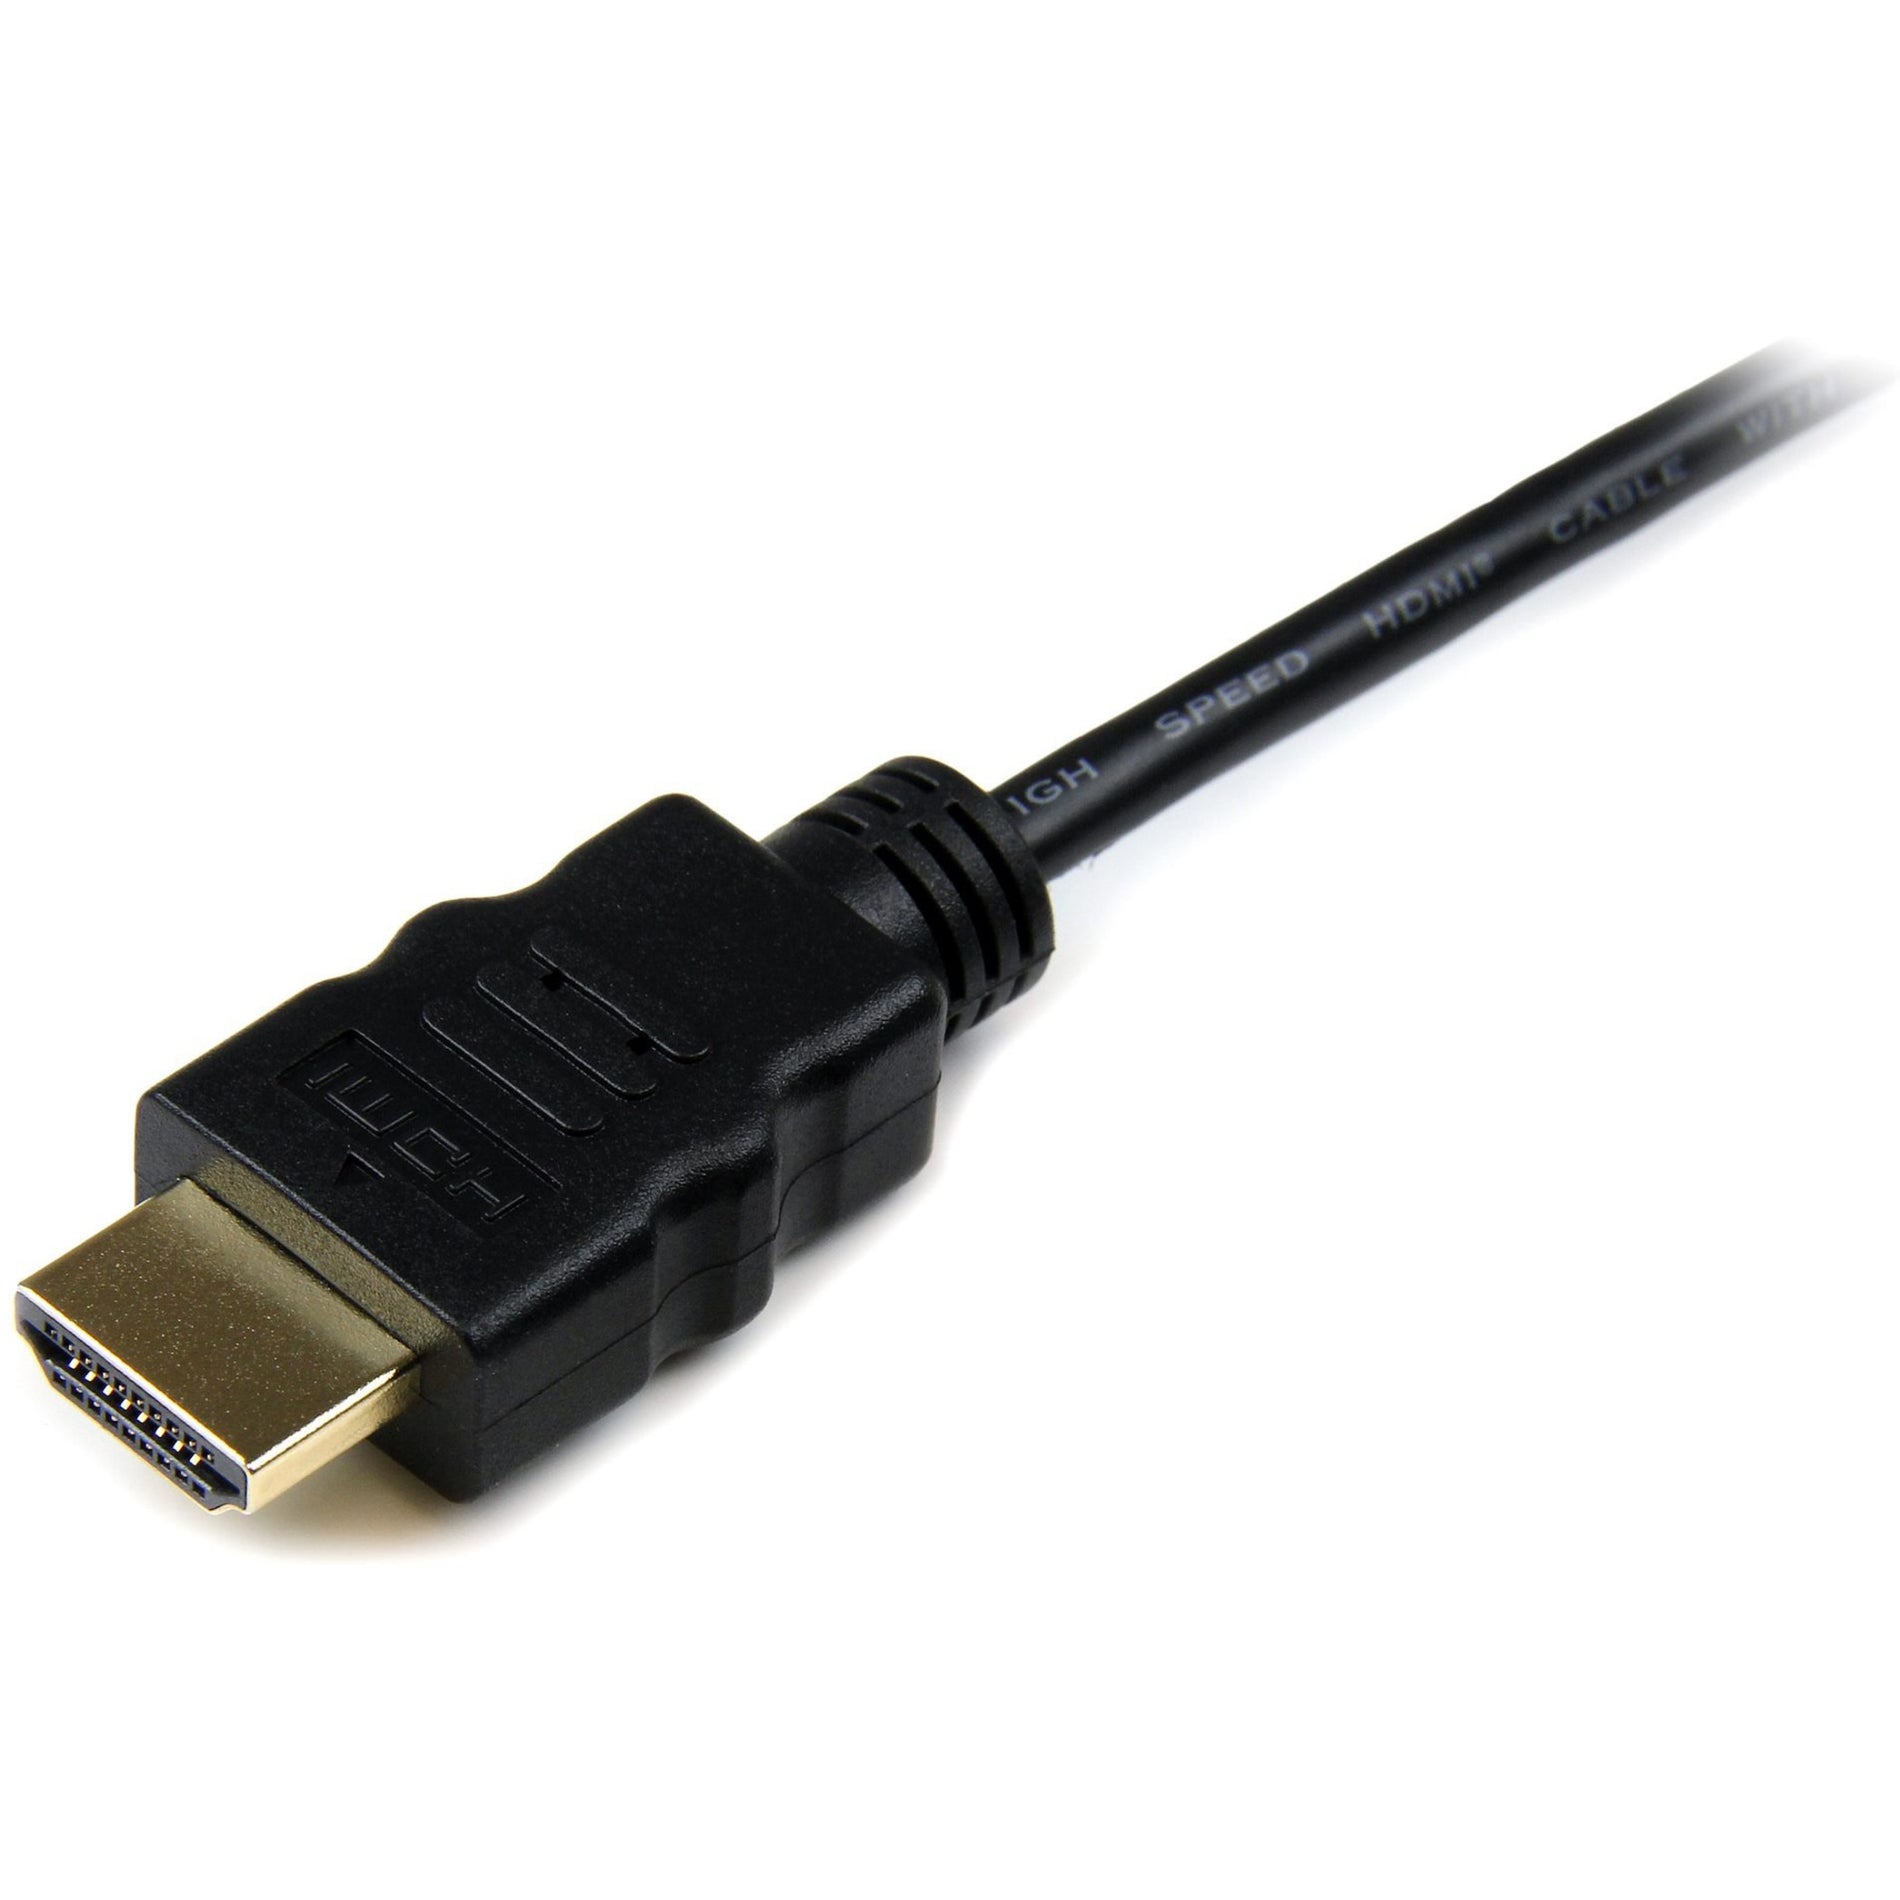 StarTech.com HDMIADMM3 3 ft High Speed HDMI Cable with Ethernet - HDMI to HDMI Micro - M/M, 4K Supported, Gold Plated Connectors, Black